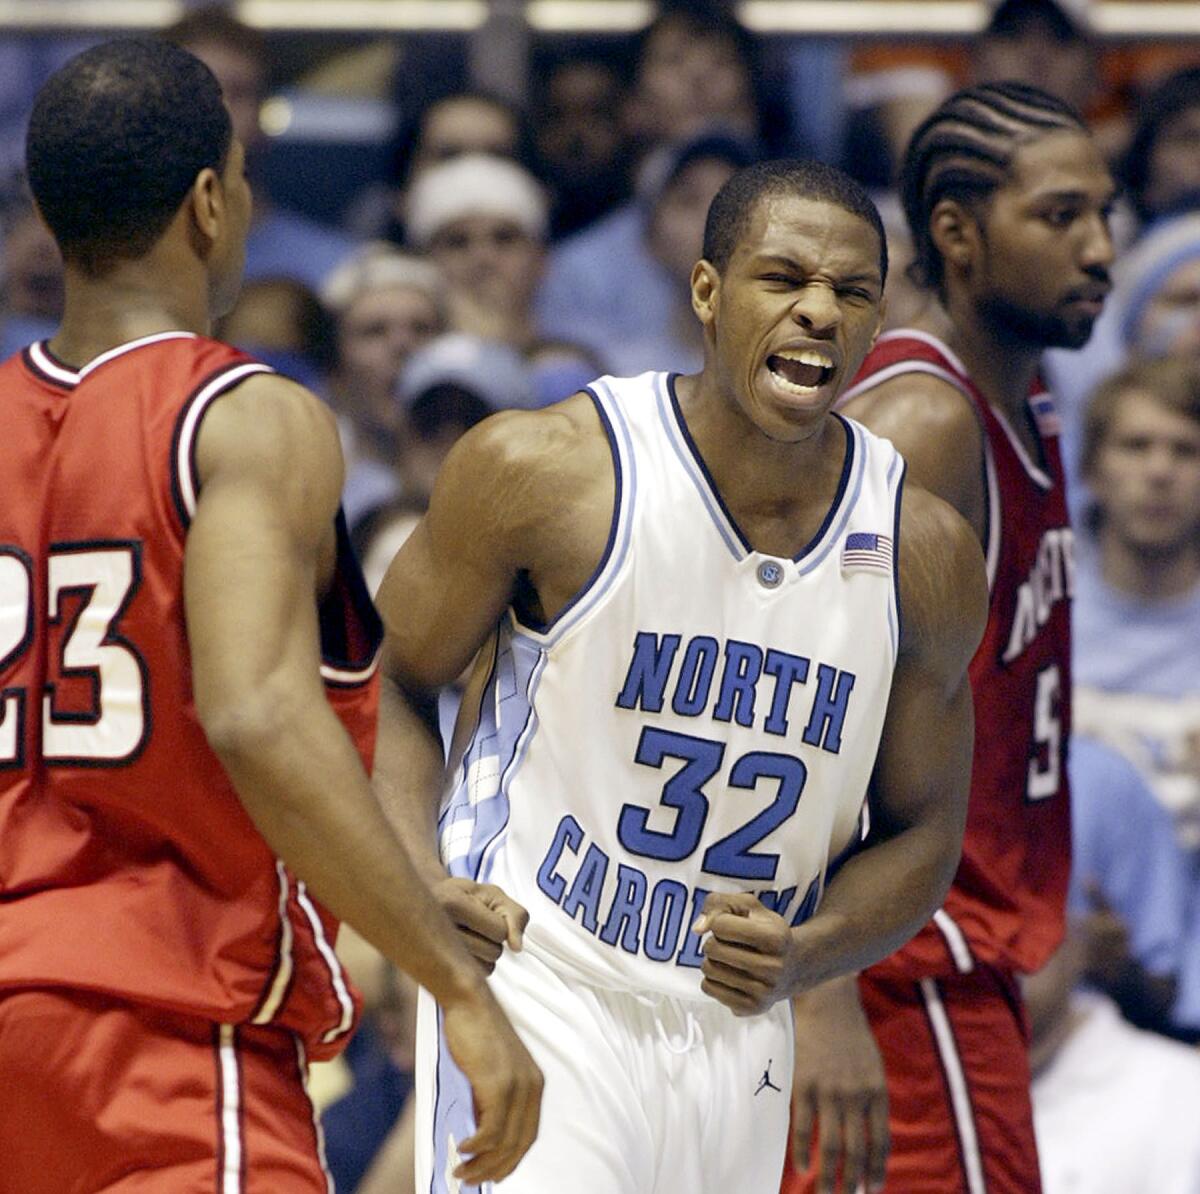 Rashad McCants made North Carolina dean's list without attending class